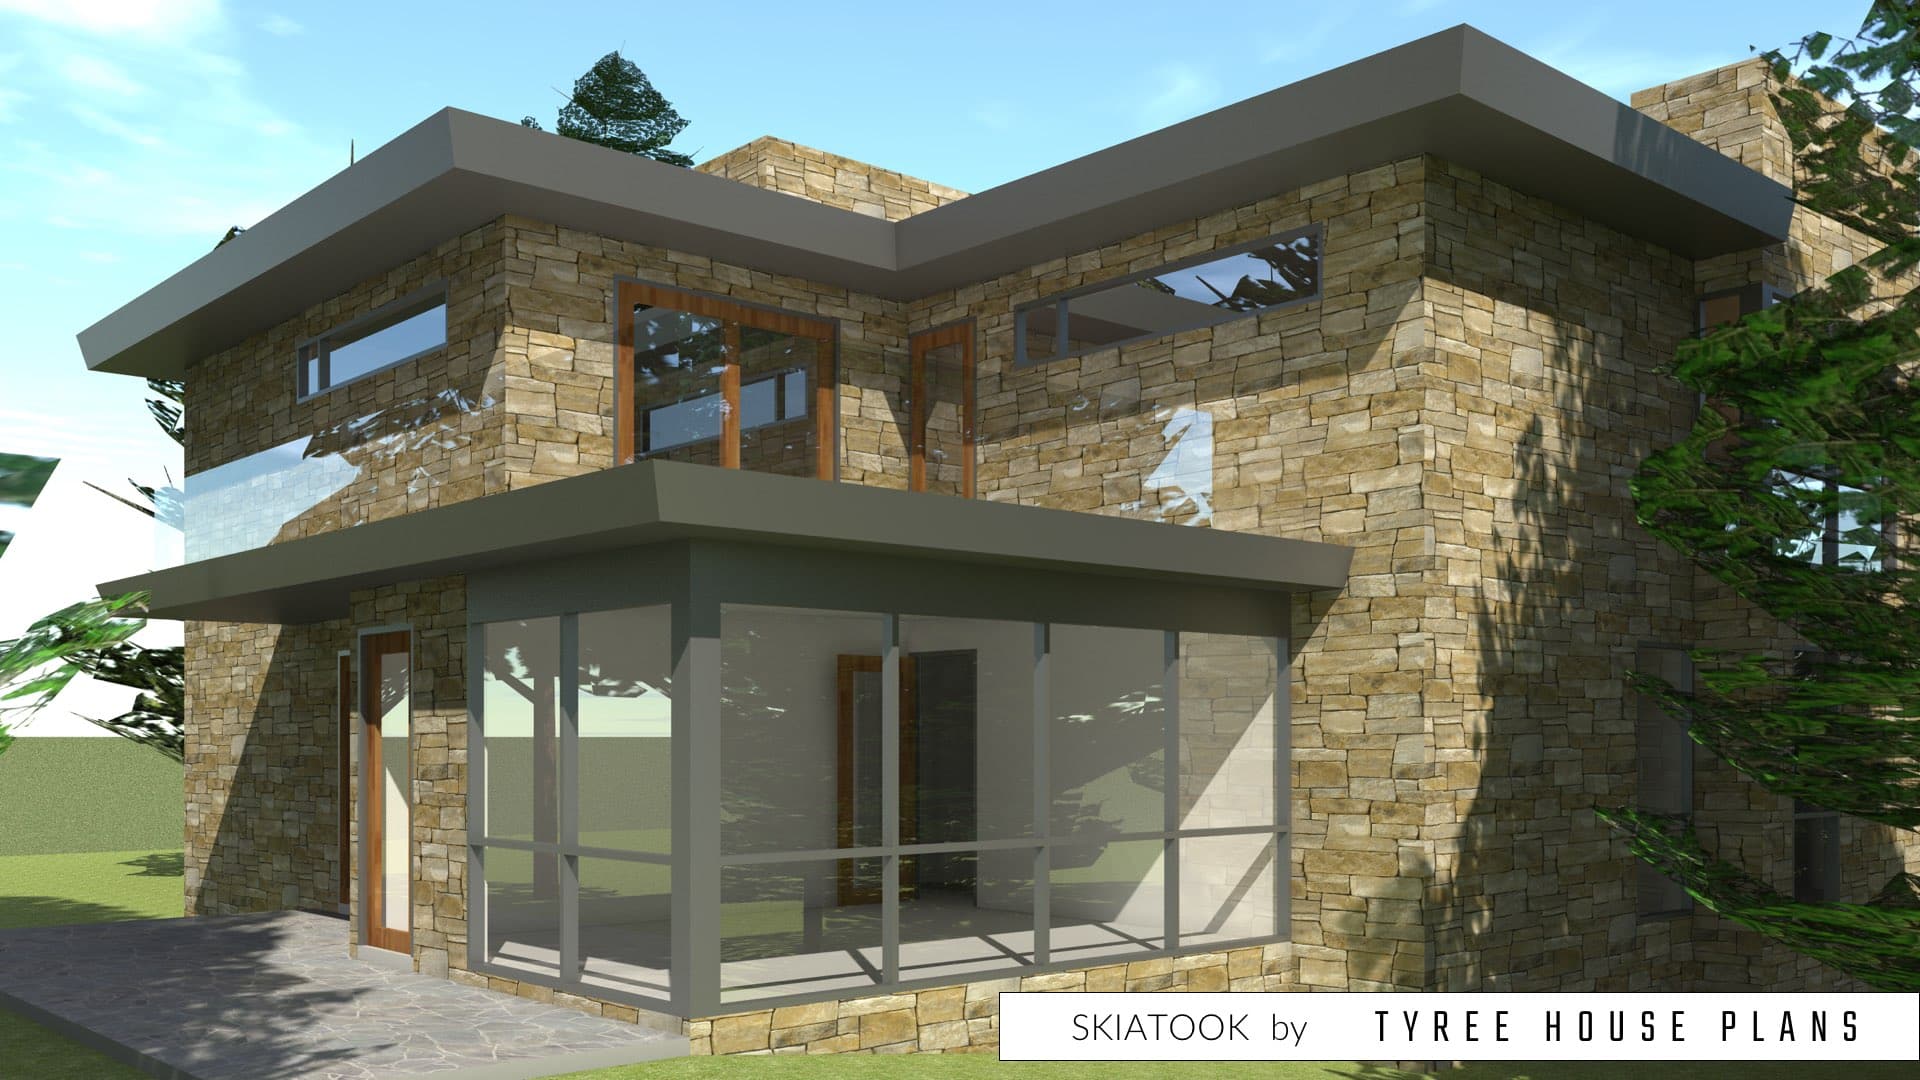 Skiatook House Plan by Tyree House Plans